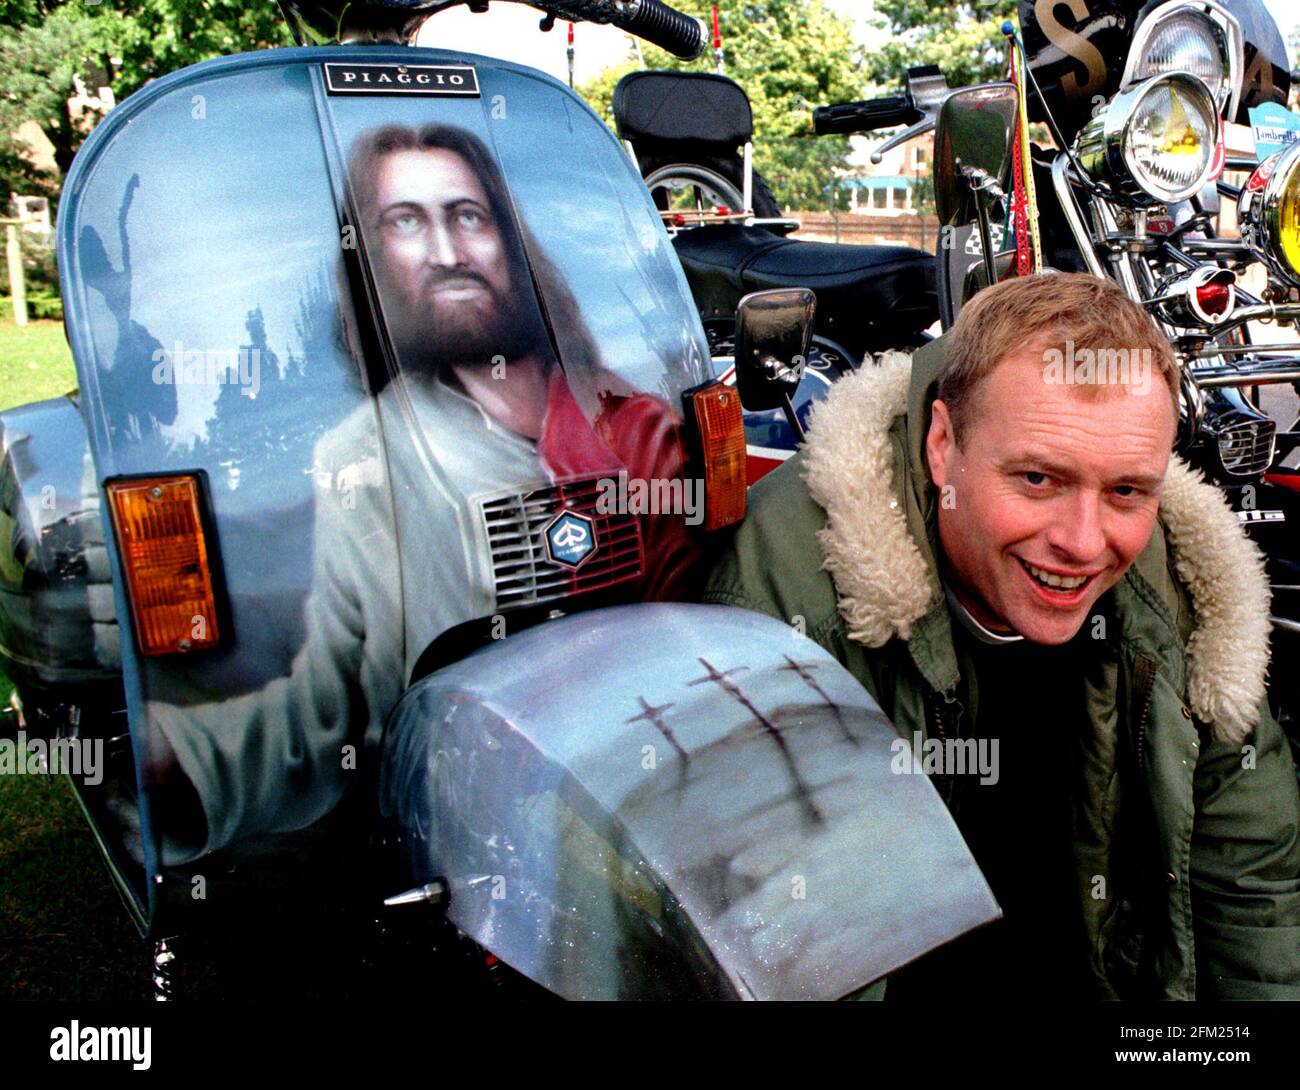 SCOOTER MAD VICAR REV. MIKE BROTHERTON WITH HIS SCOOTER COMPLETE WITH PORTRAIT OF CHRIST AND THE CRUCIFIXION ON THE MUDGUARD, PIC MIKE WALKER, 1998 Stock Photo